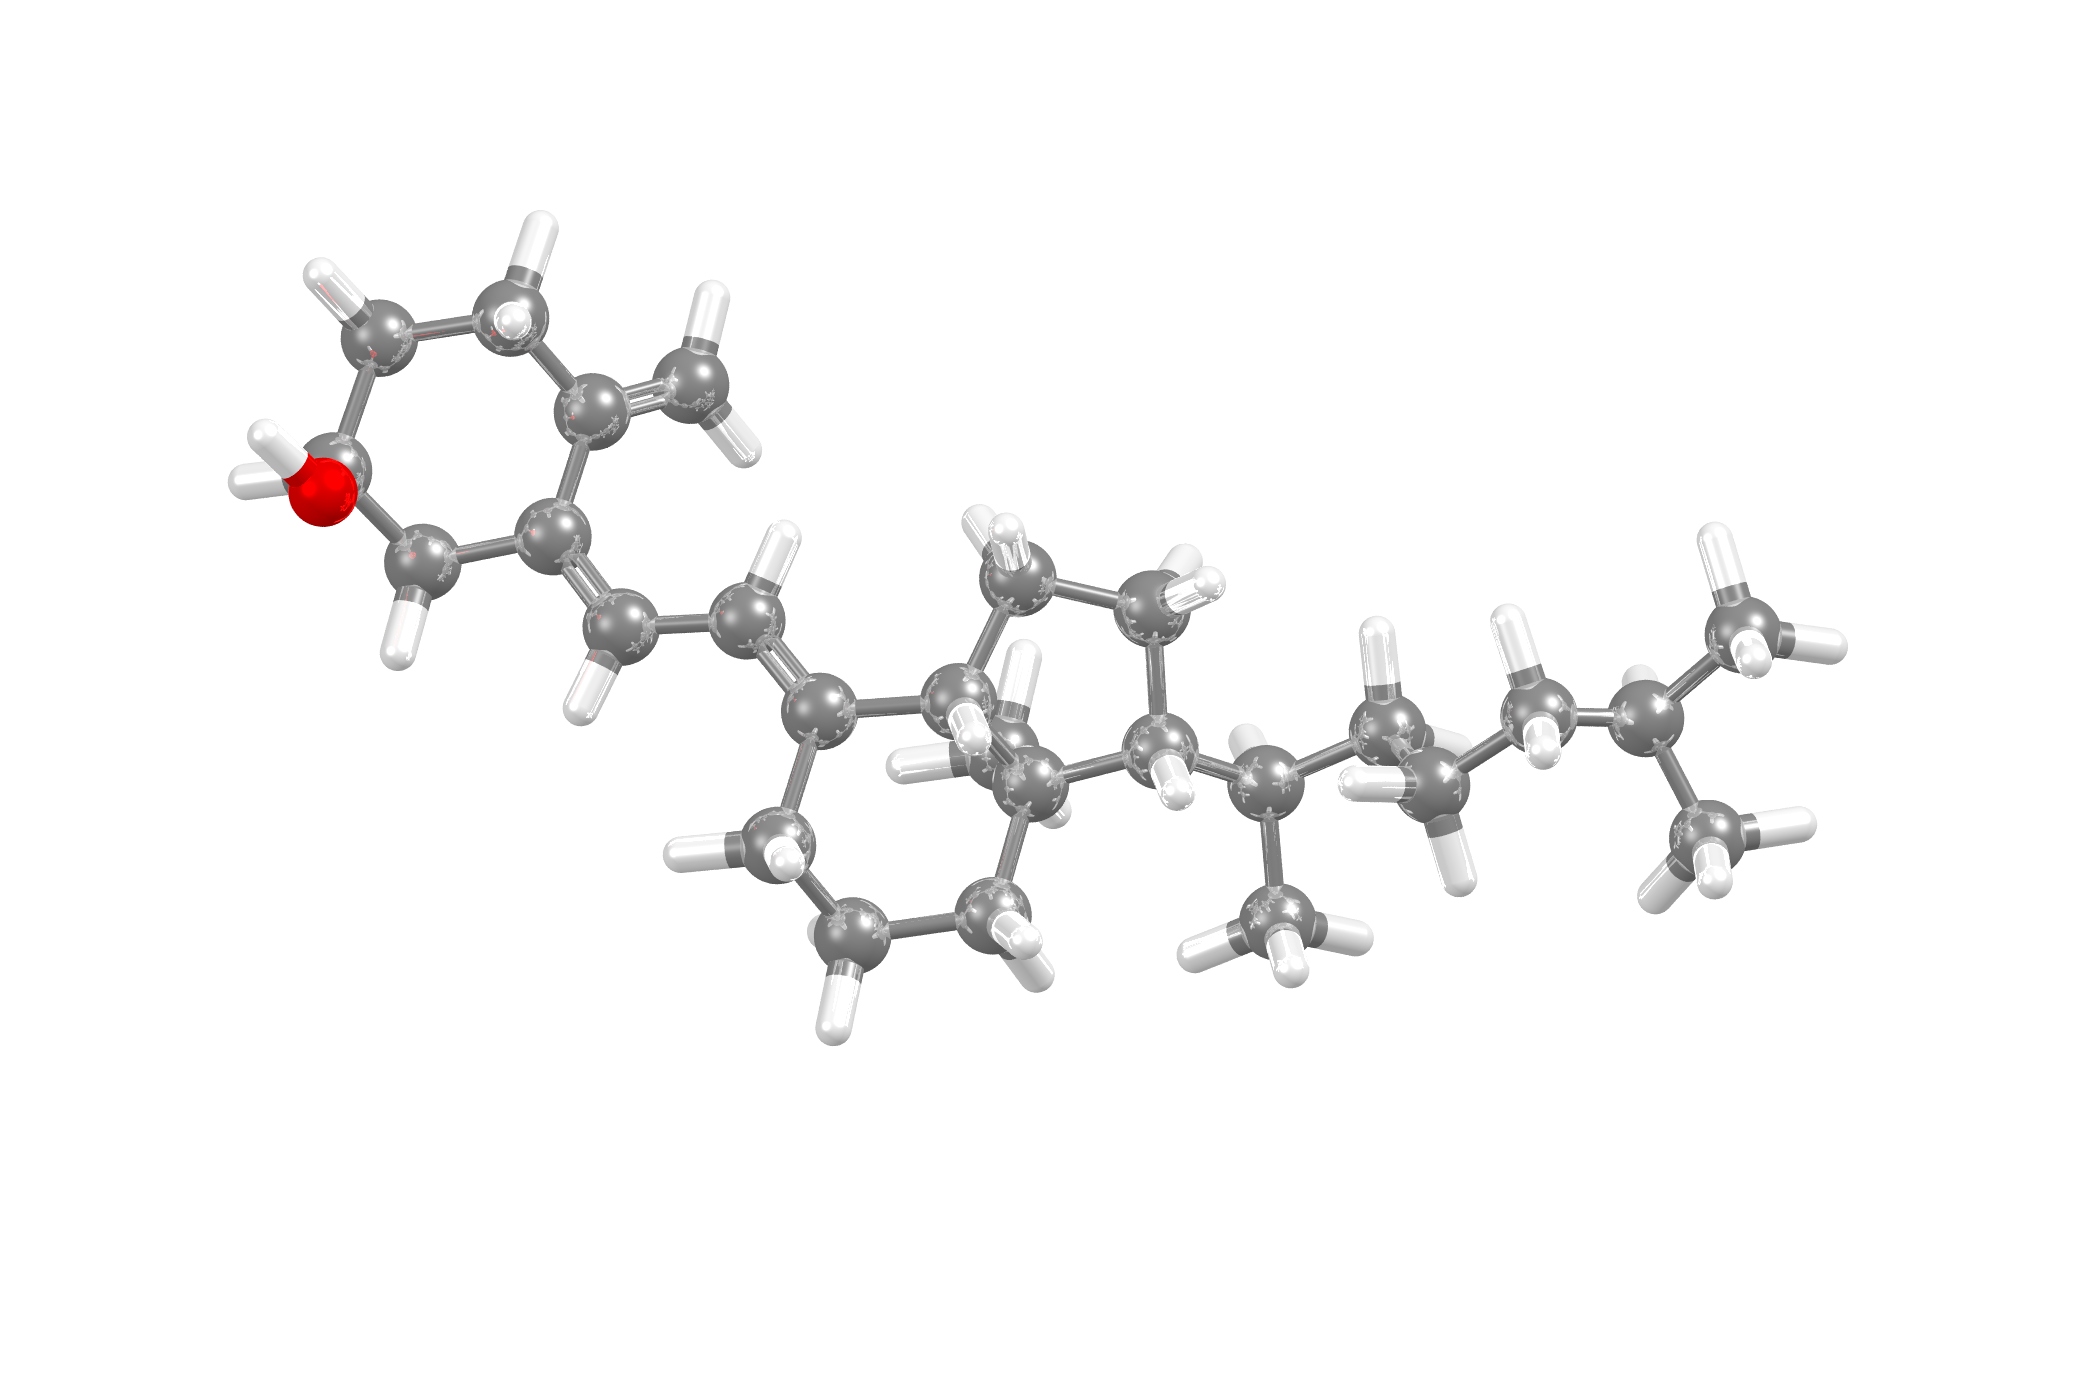 Vitamin D2 structure, from the CSD